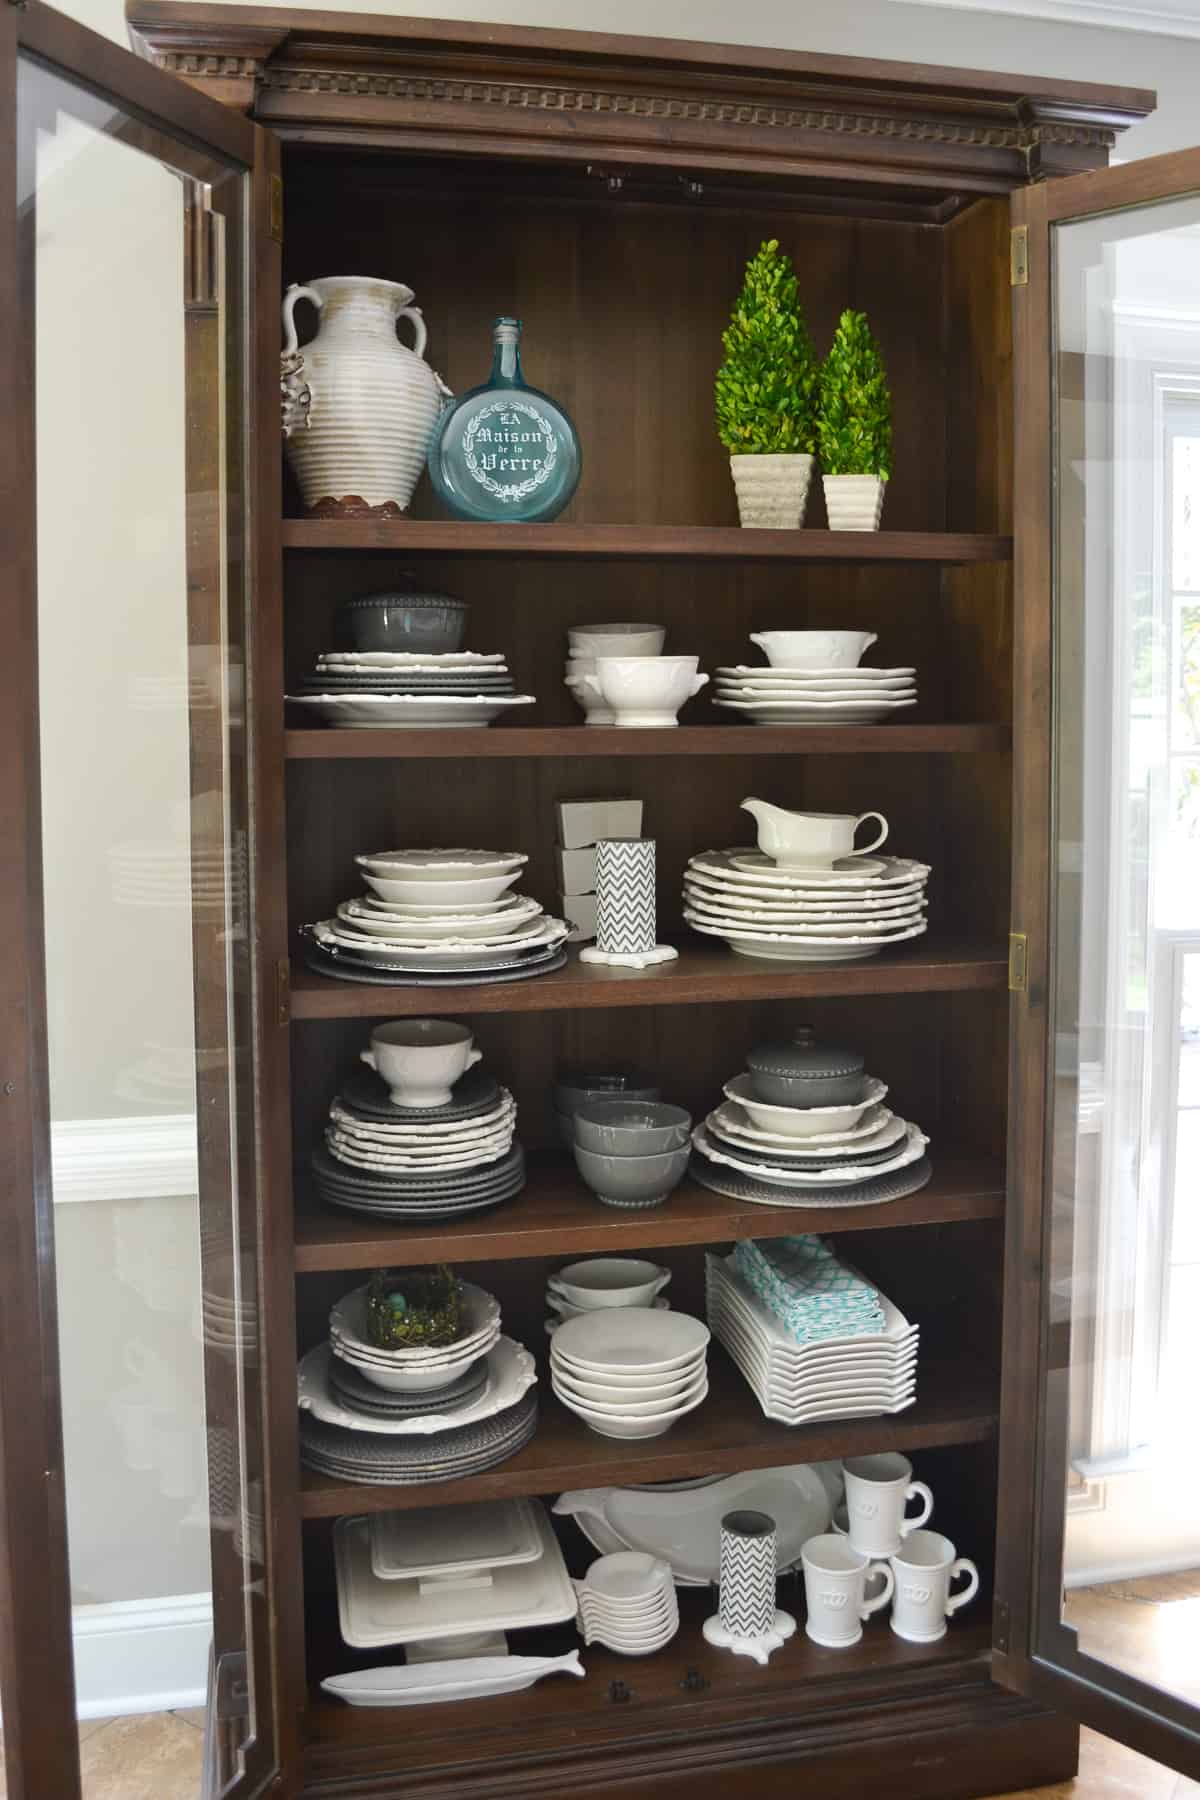 tall wood cabinet with glass doors filled with white plates, platters and bowls